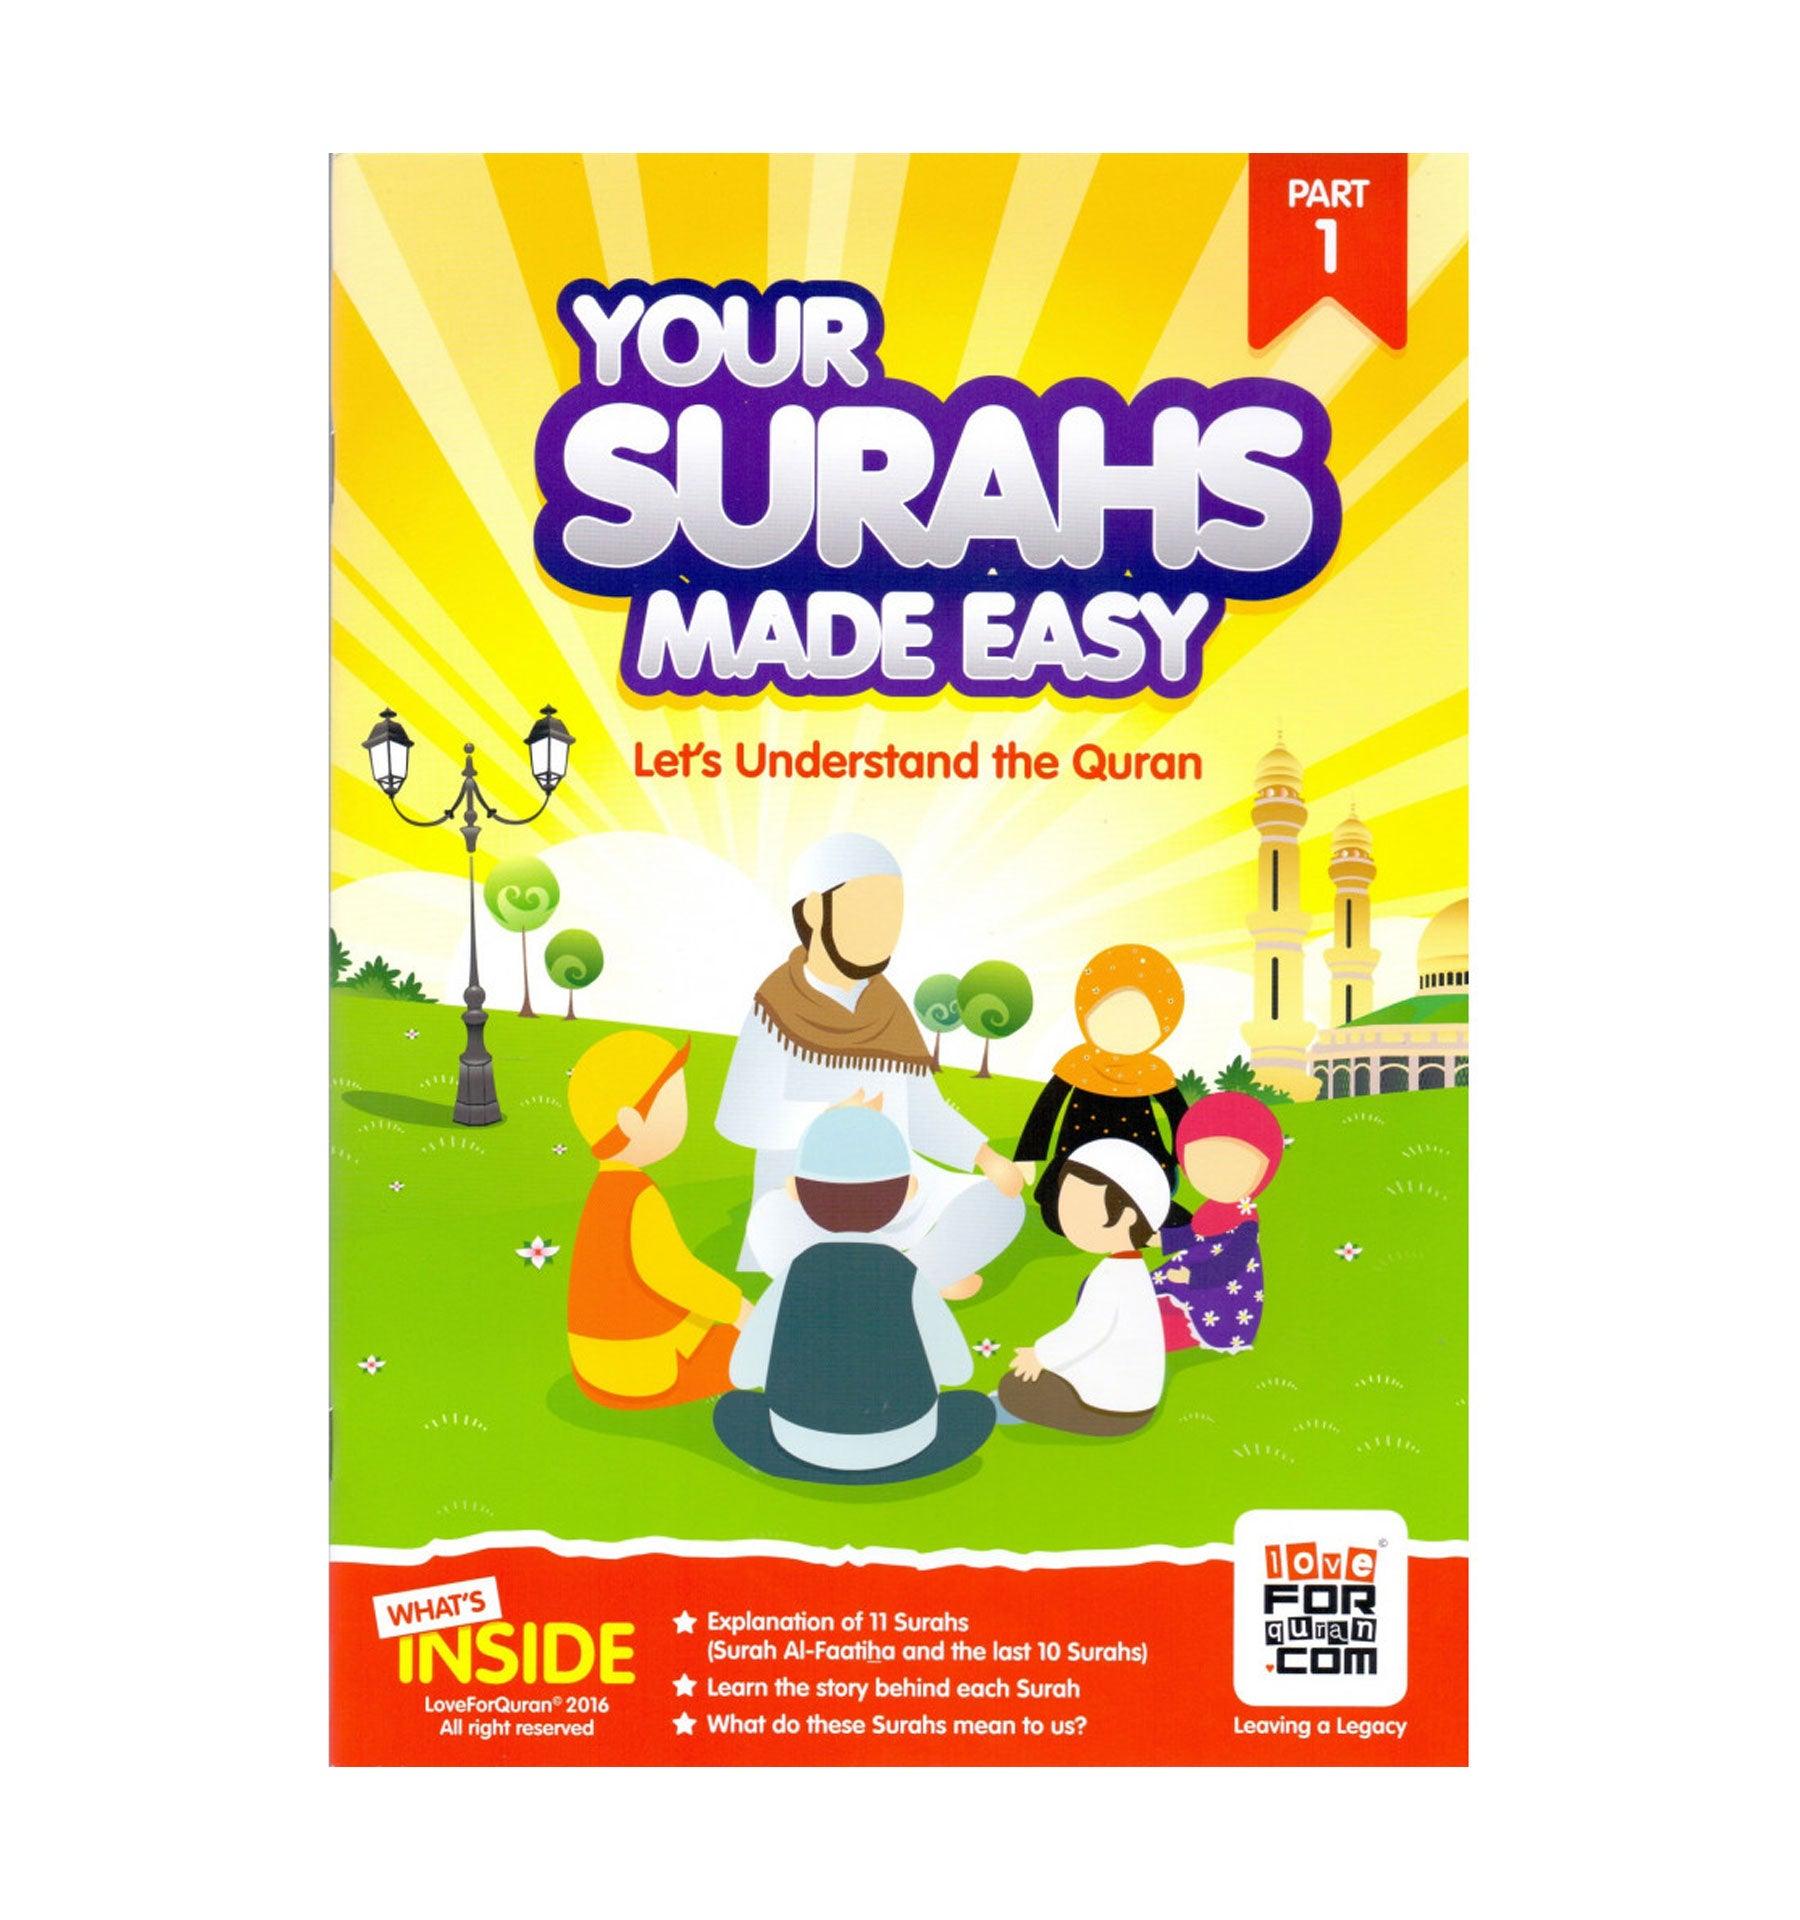 Your Surahs Made Easy - Islamic Pixels